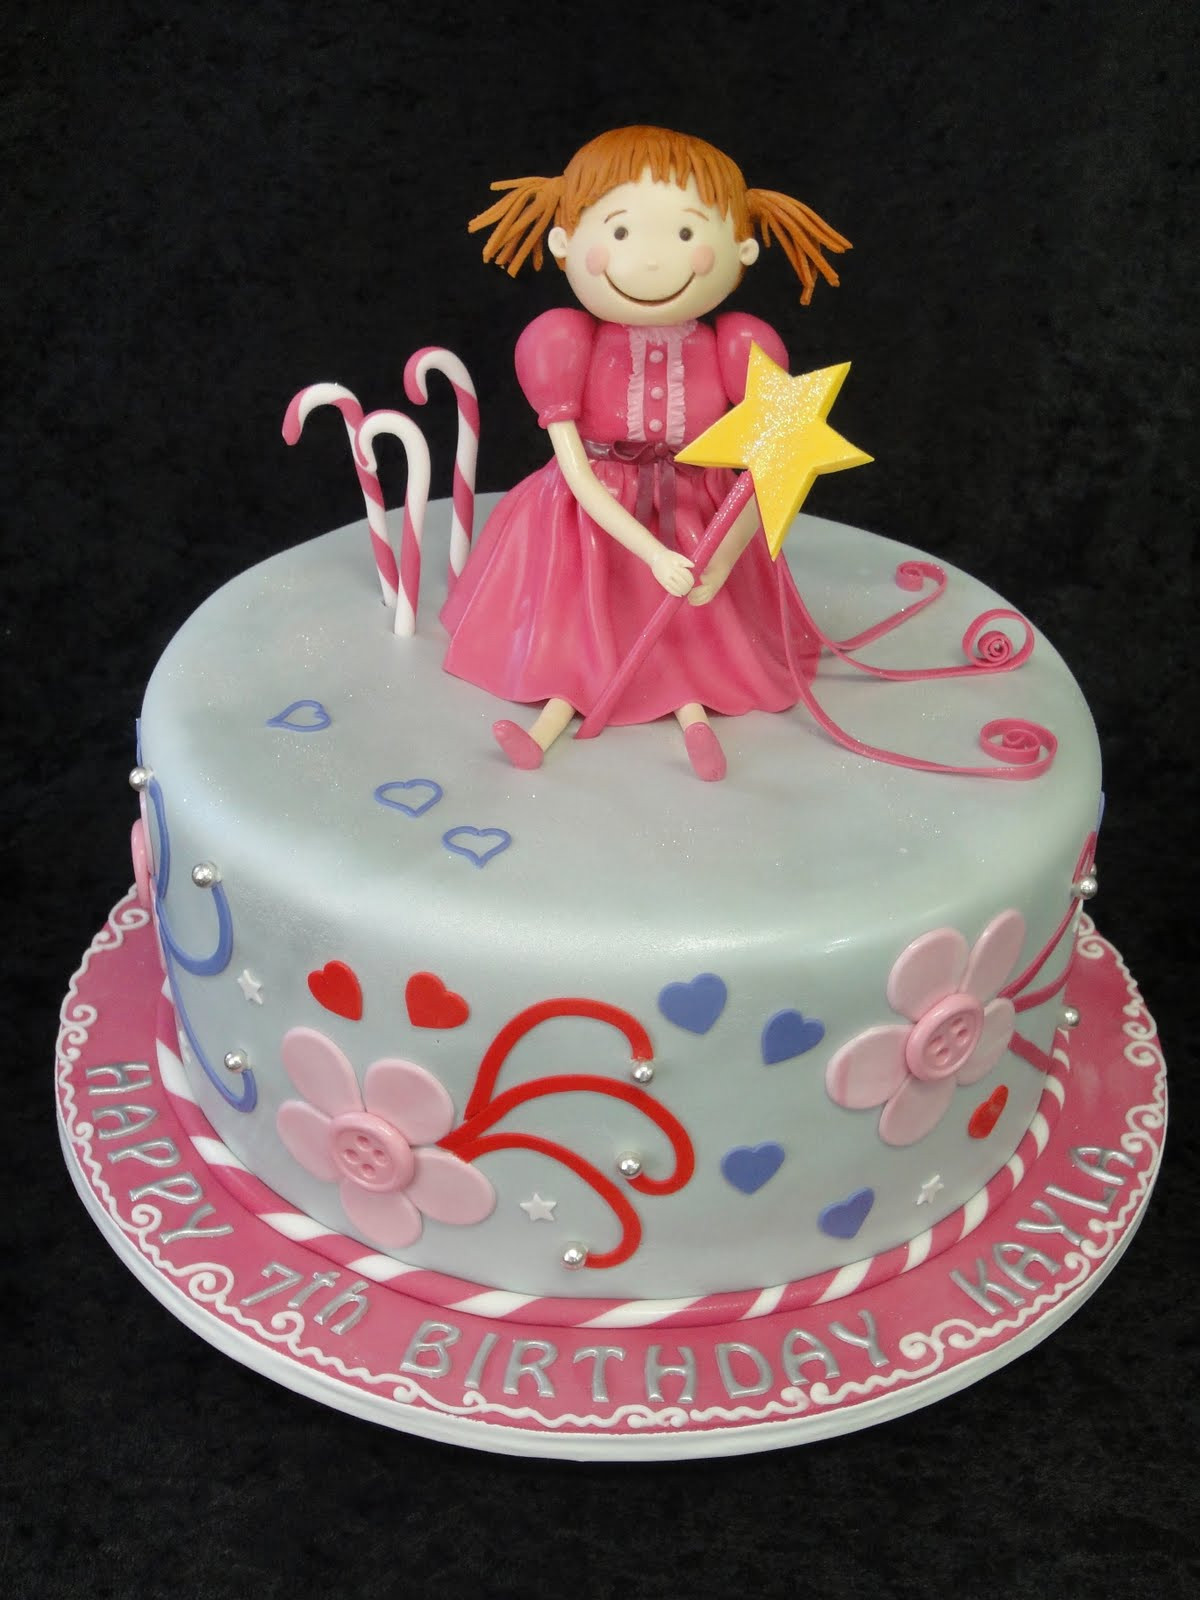 Birthday Cake Pictures Funny
 Cake Blog Because Every Cake has a Story Fun Birthday Cakes